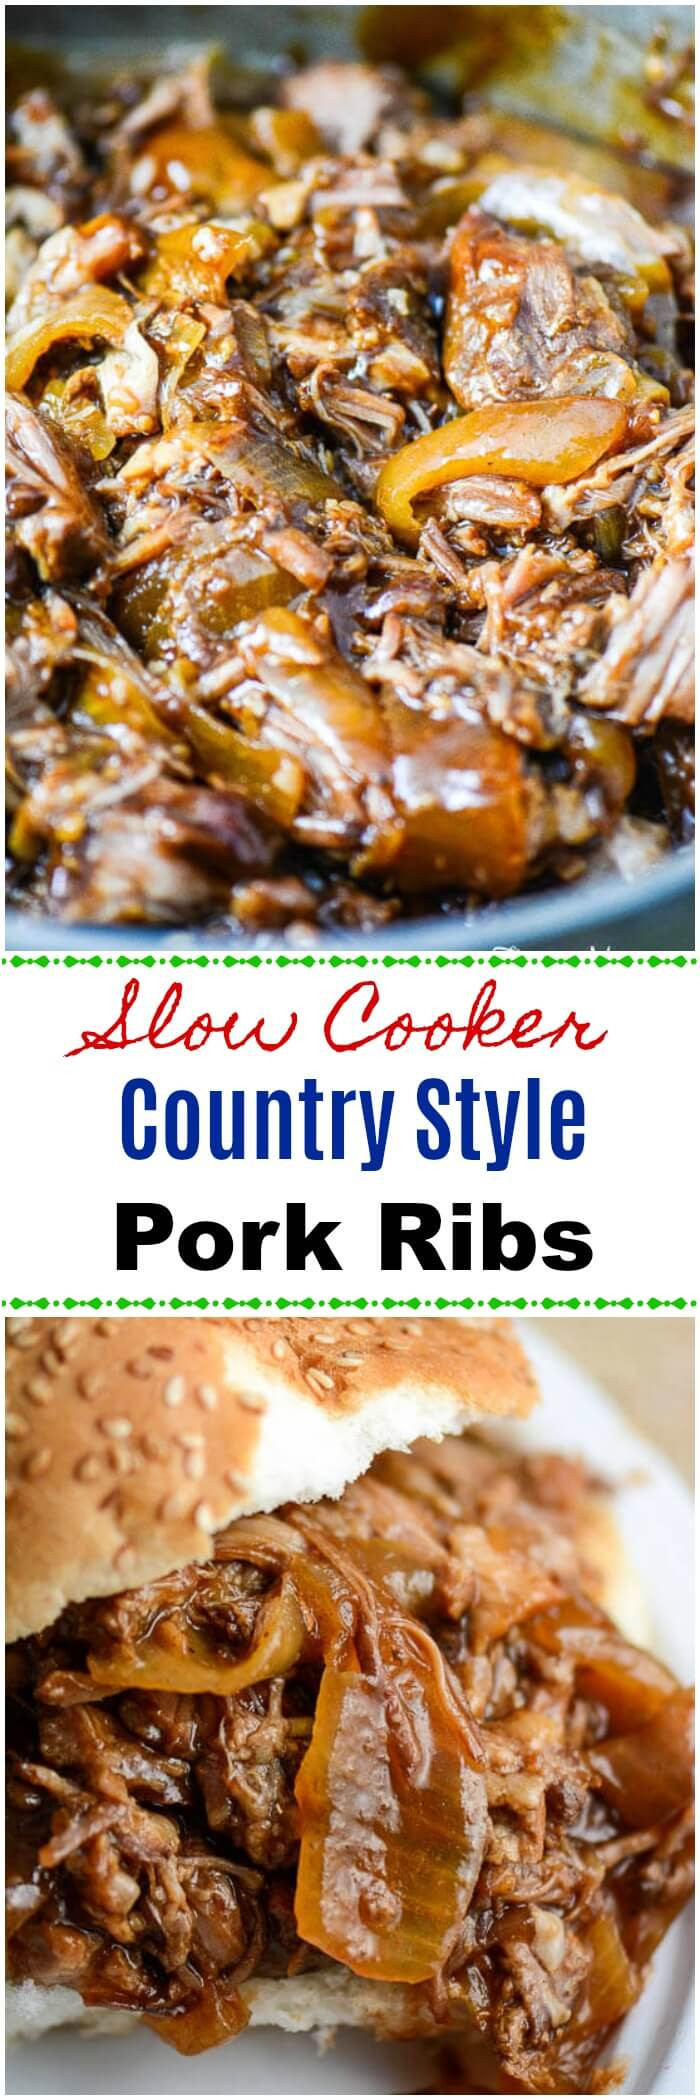 Boneless Country Style Pork Ribs Slow Cooker
 Slow Cooker Country Style Boneless Pork Ribs Flavor Mosaic